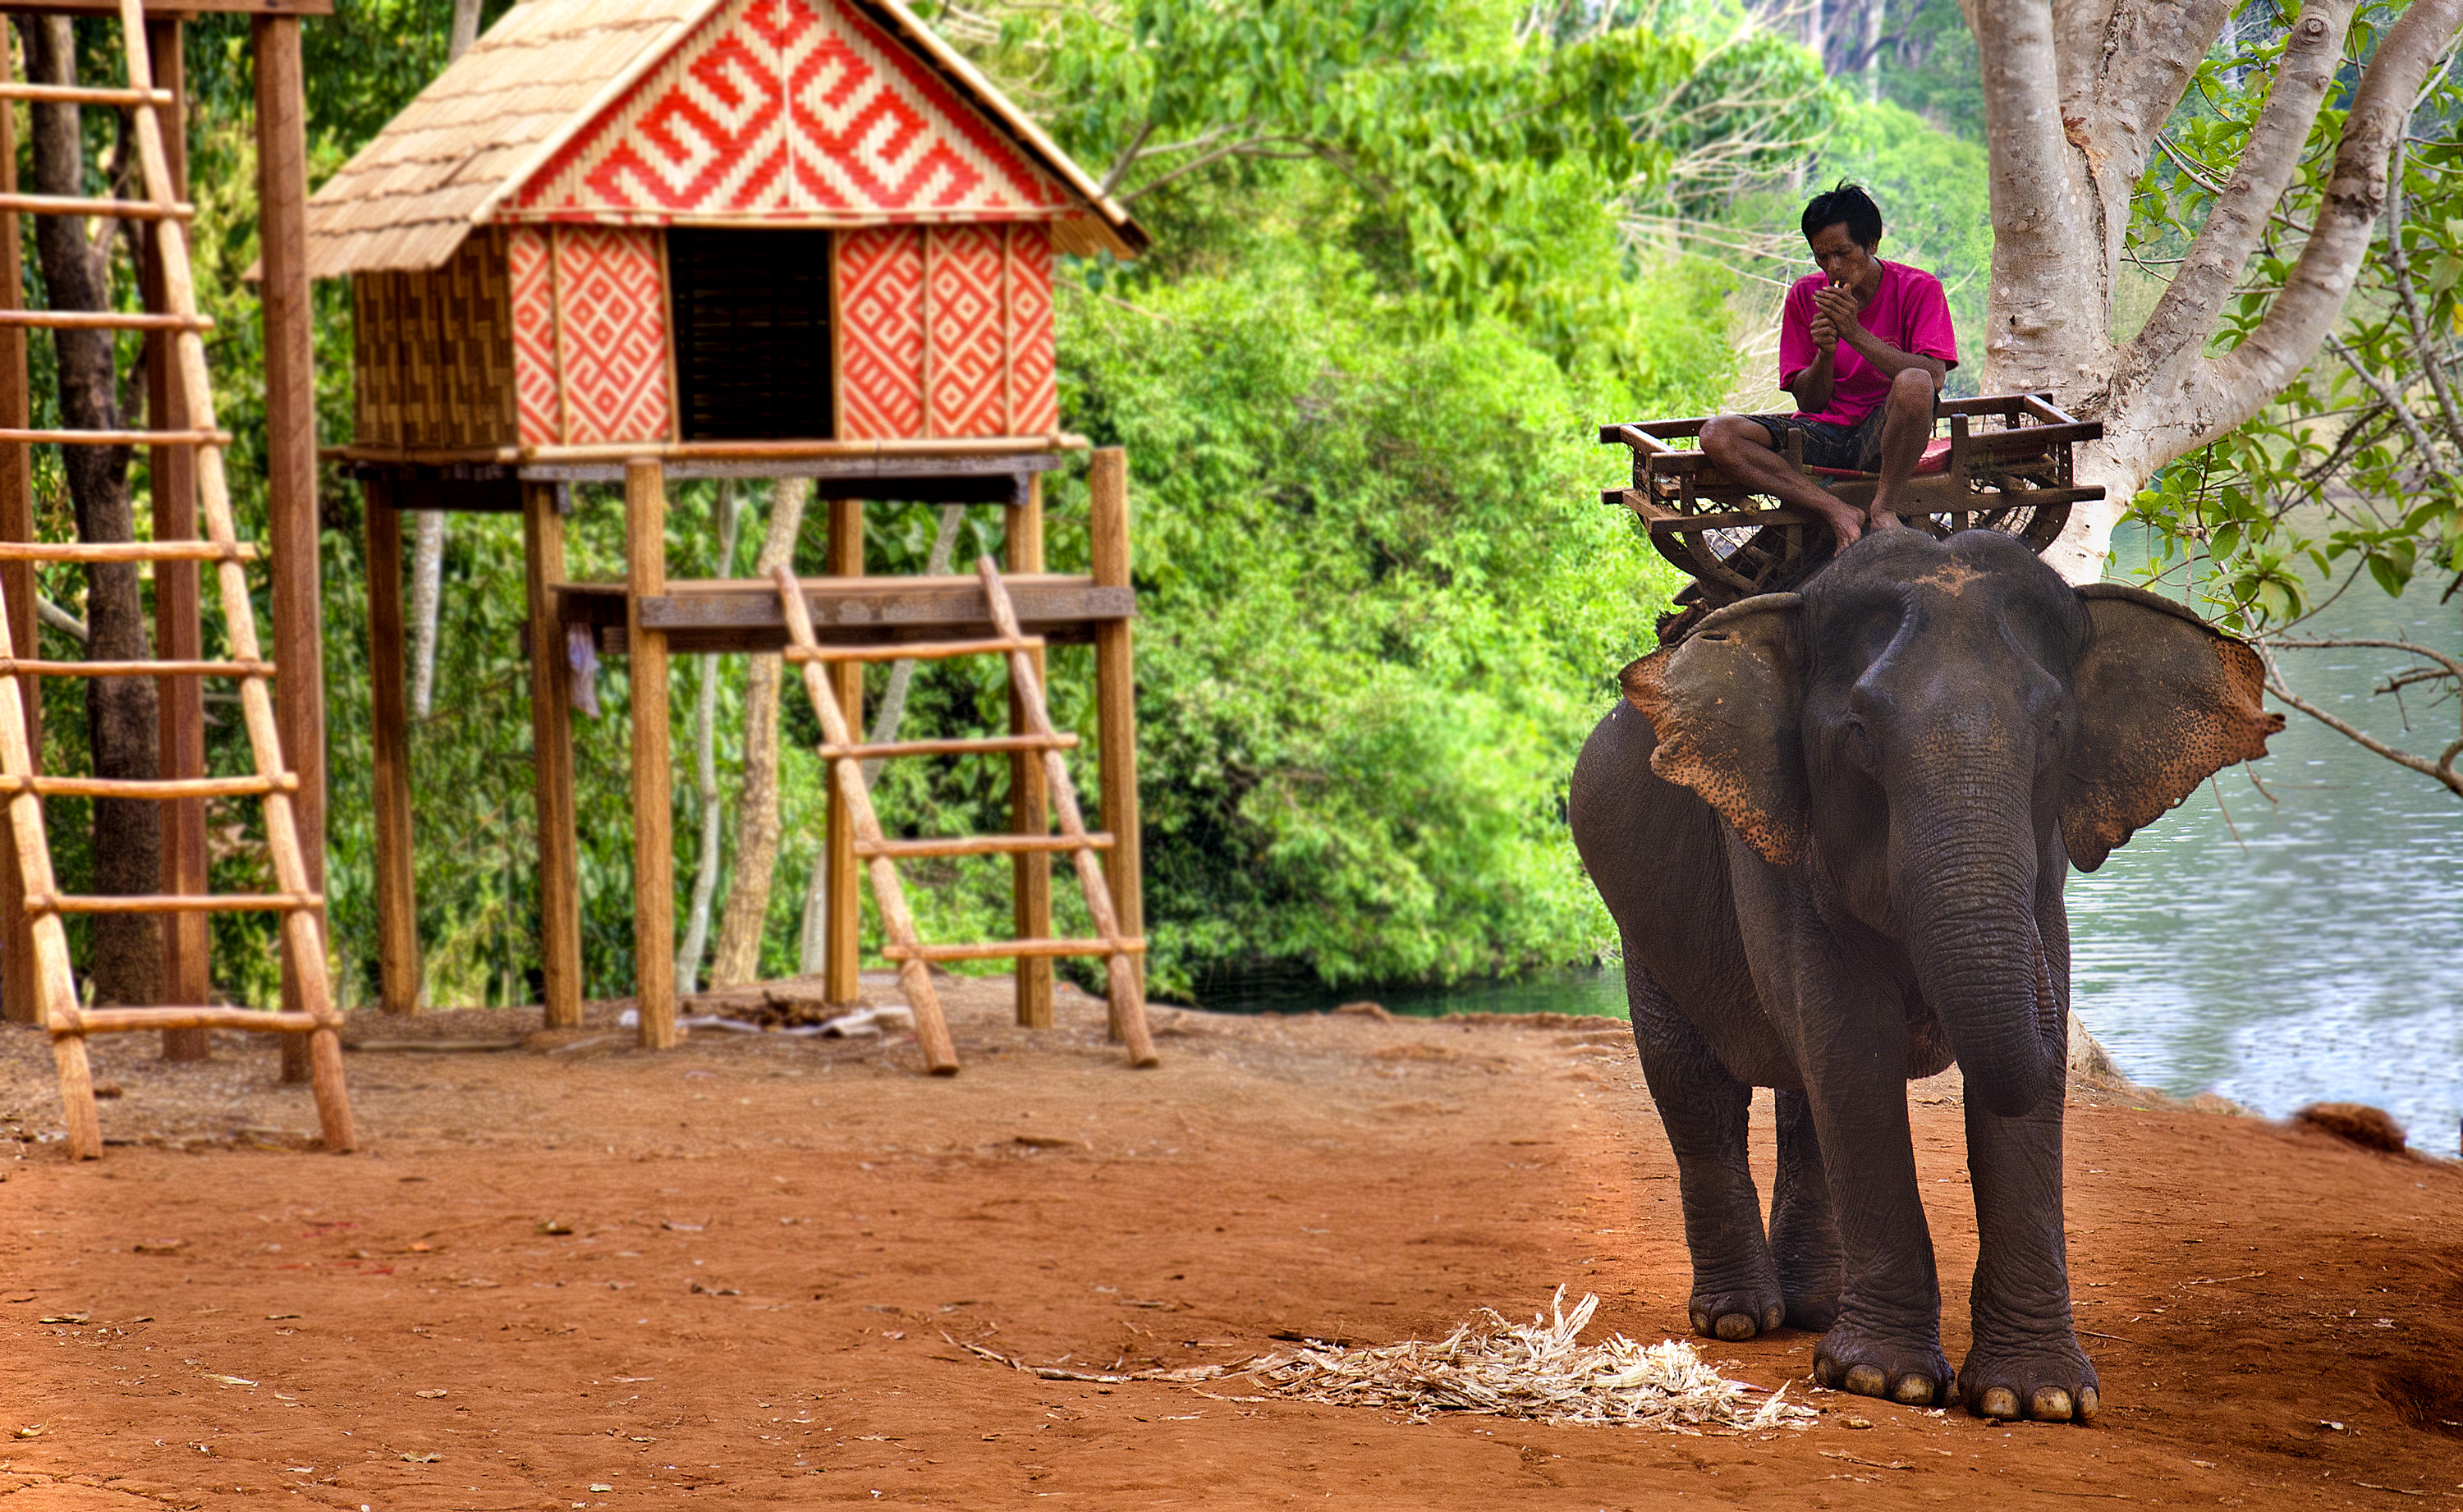 About: An Asian elephant, ridden by a Tampuan man